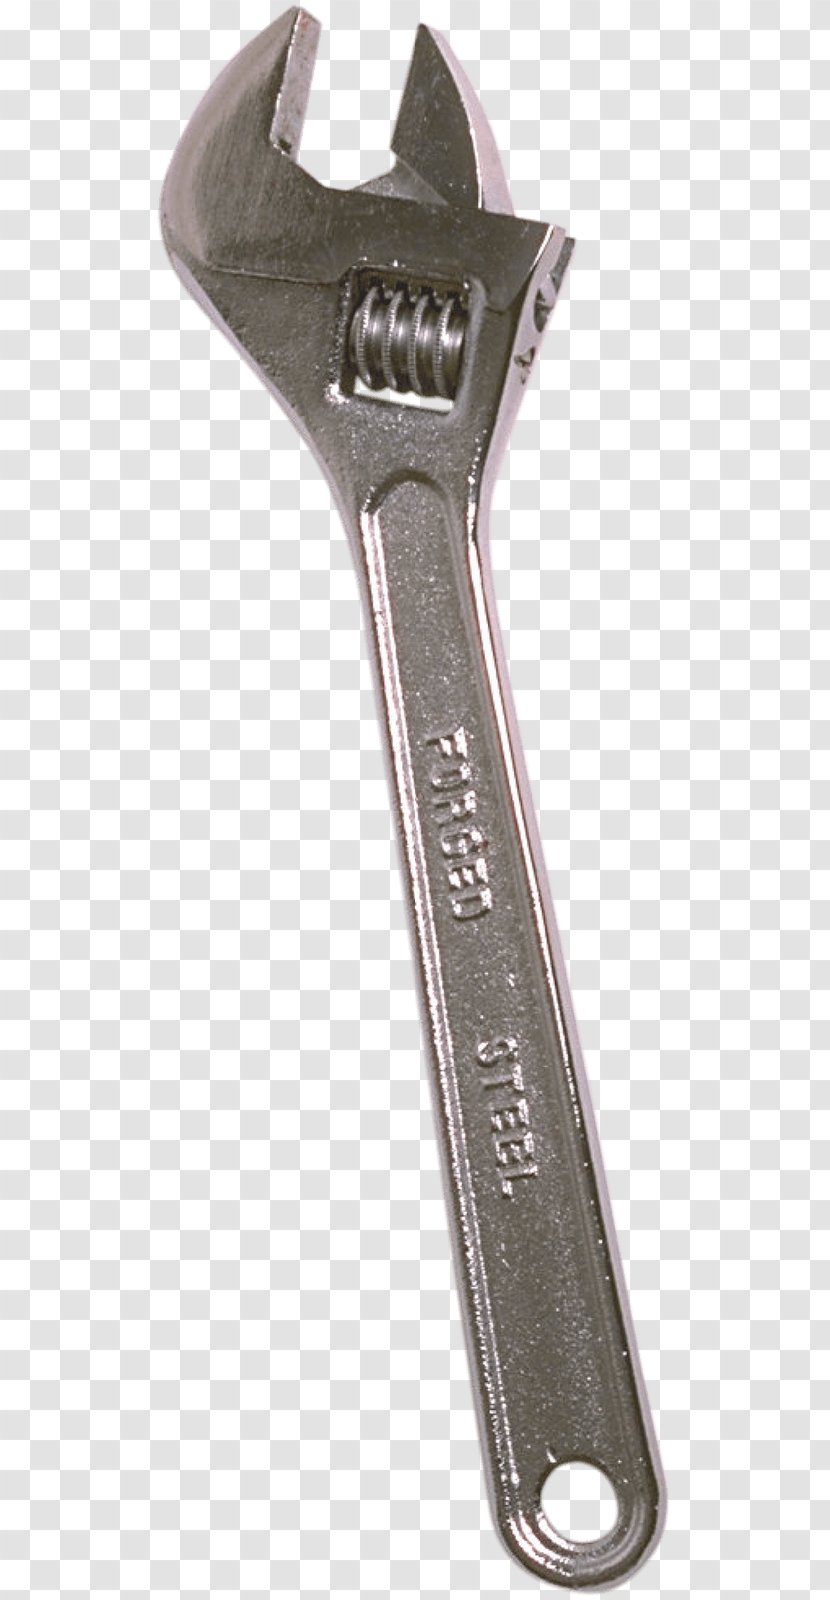 Layers GIMP - Image Resolution - Wrench Spanner Transparent PNG